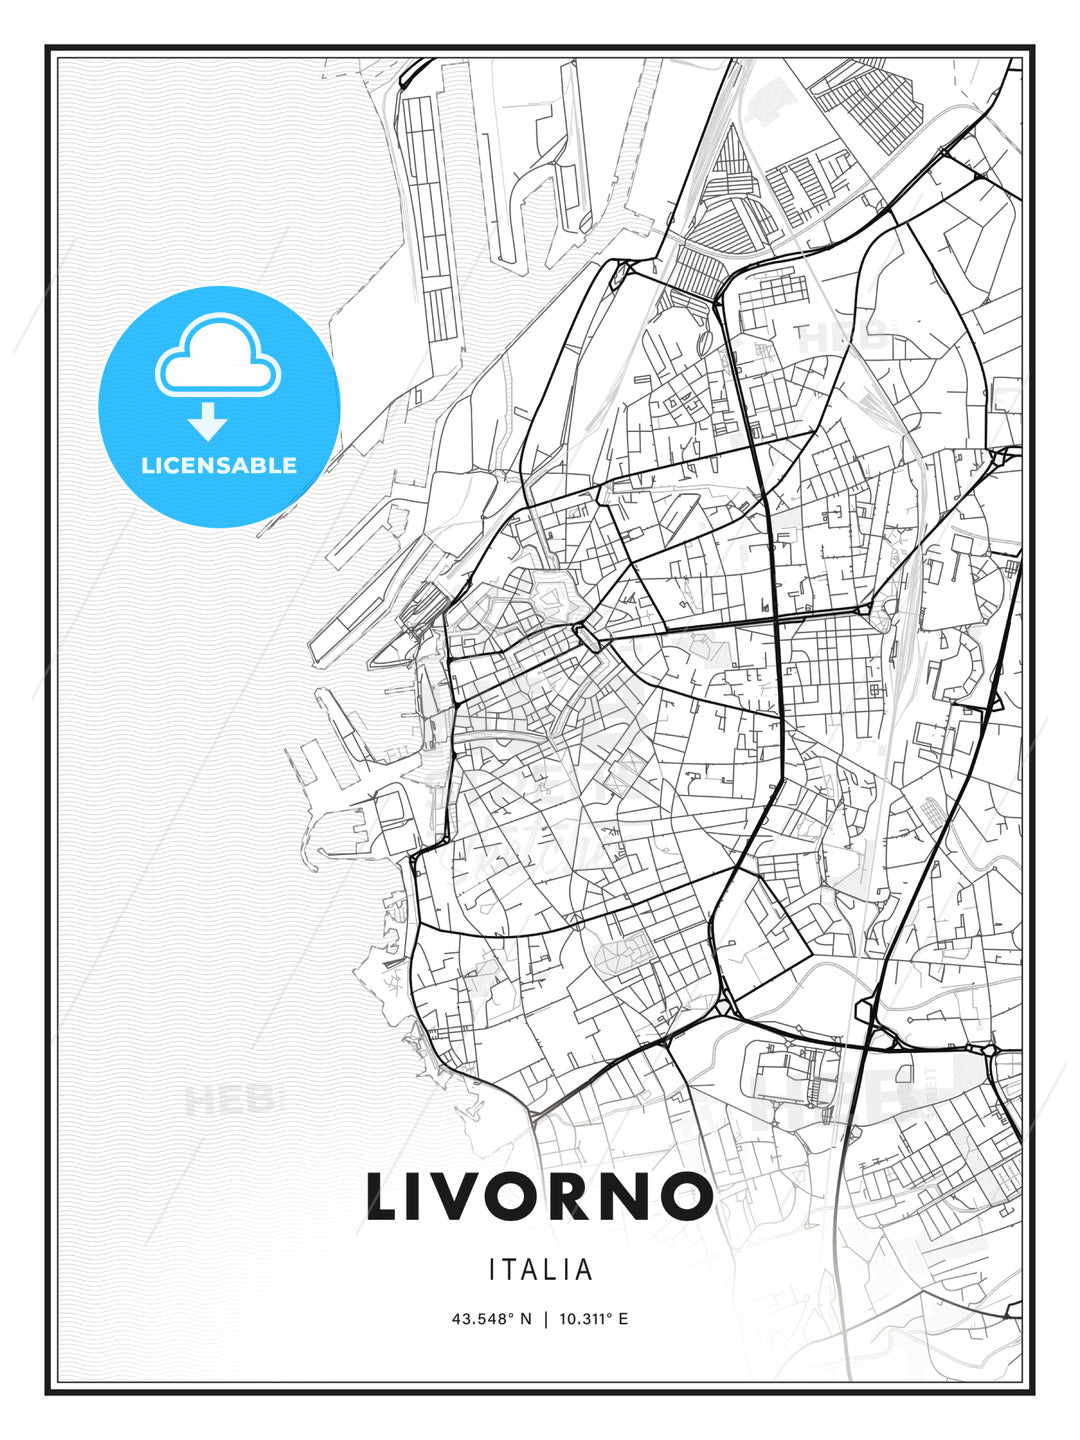 Livorno, Italy, Modern Print Template in Various Formats - HEBSTREITS Sketches